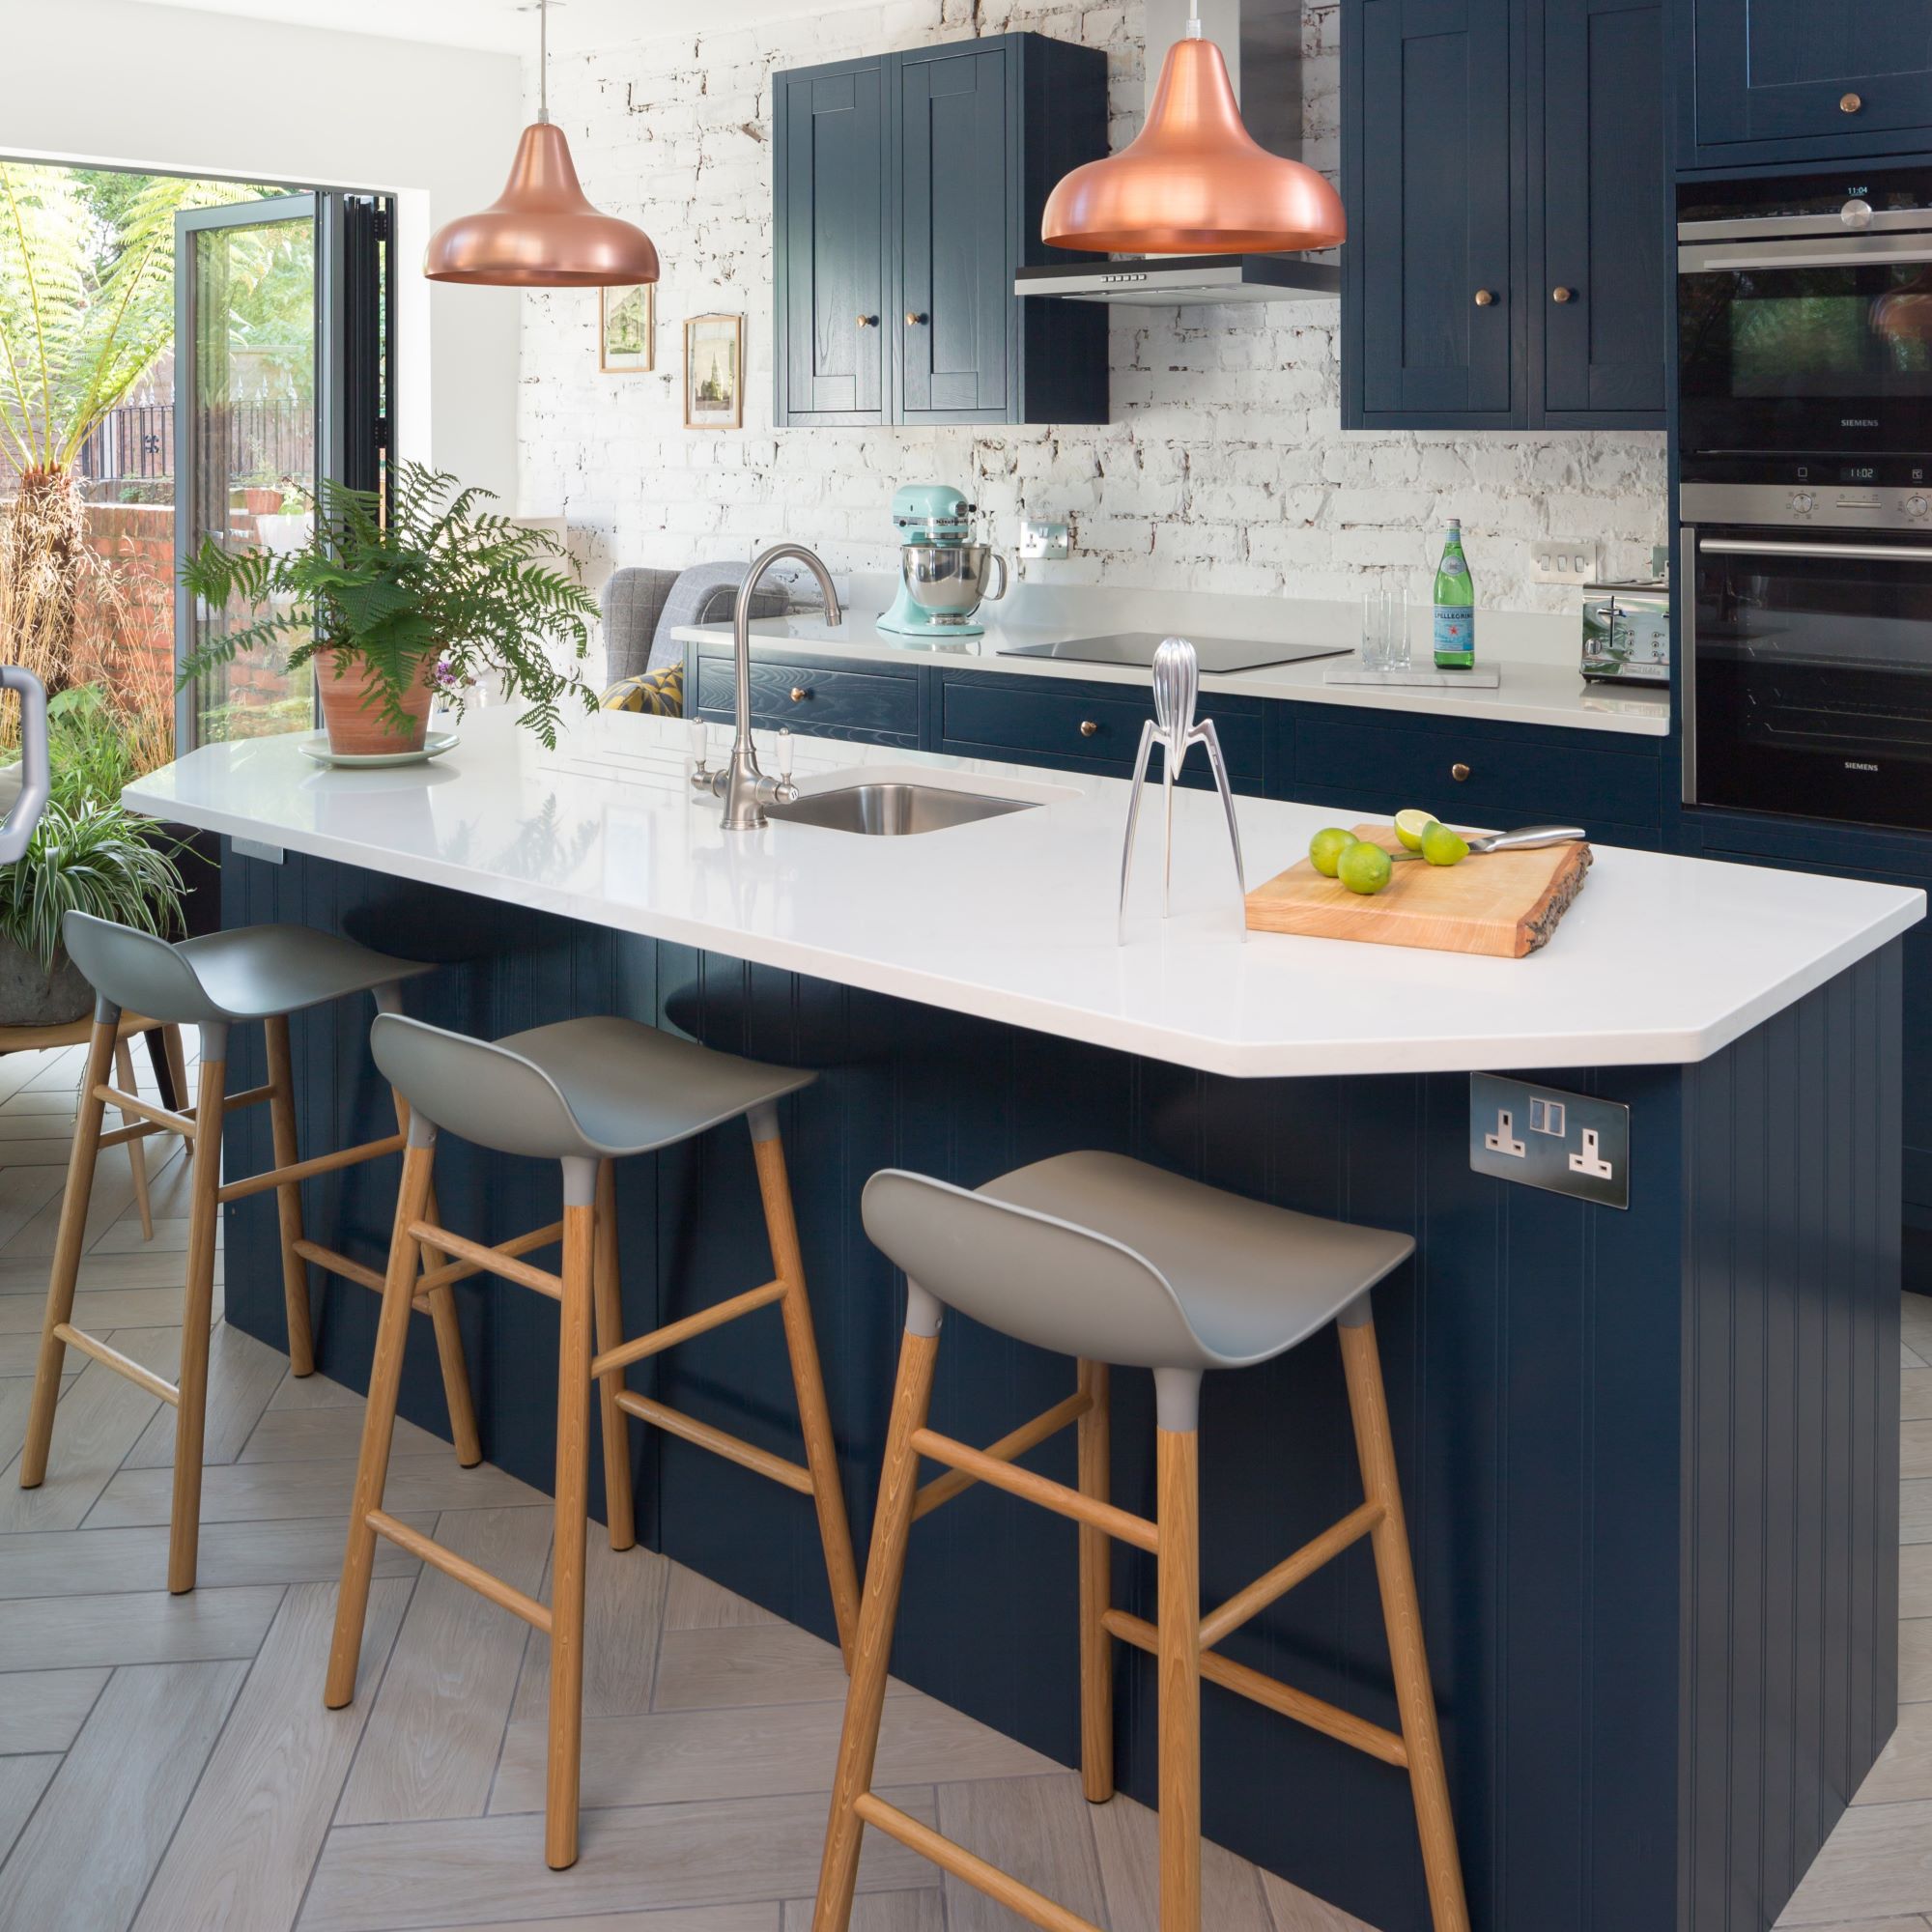 Navy blue kitchen island with white countertop underneath lights